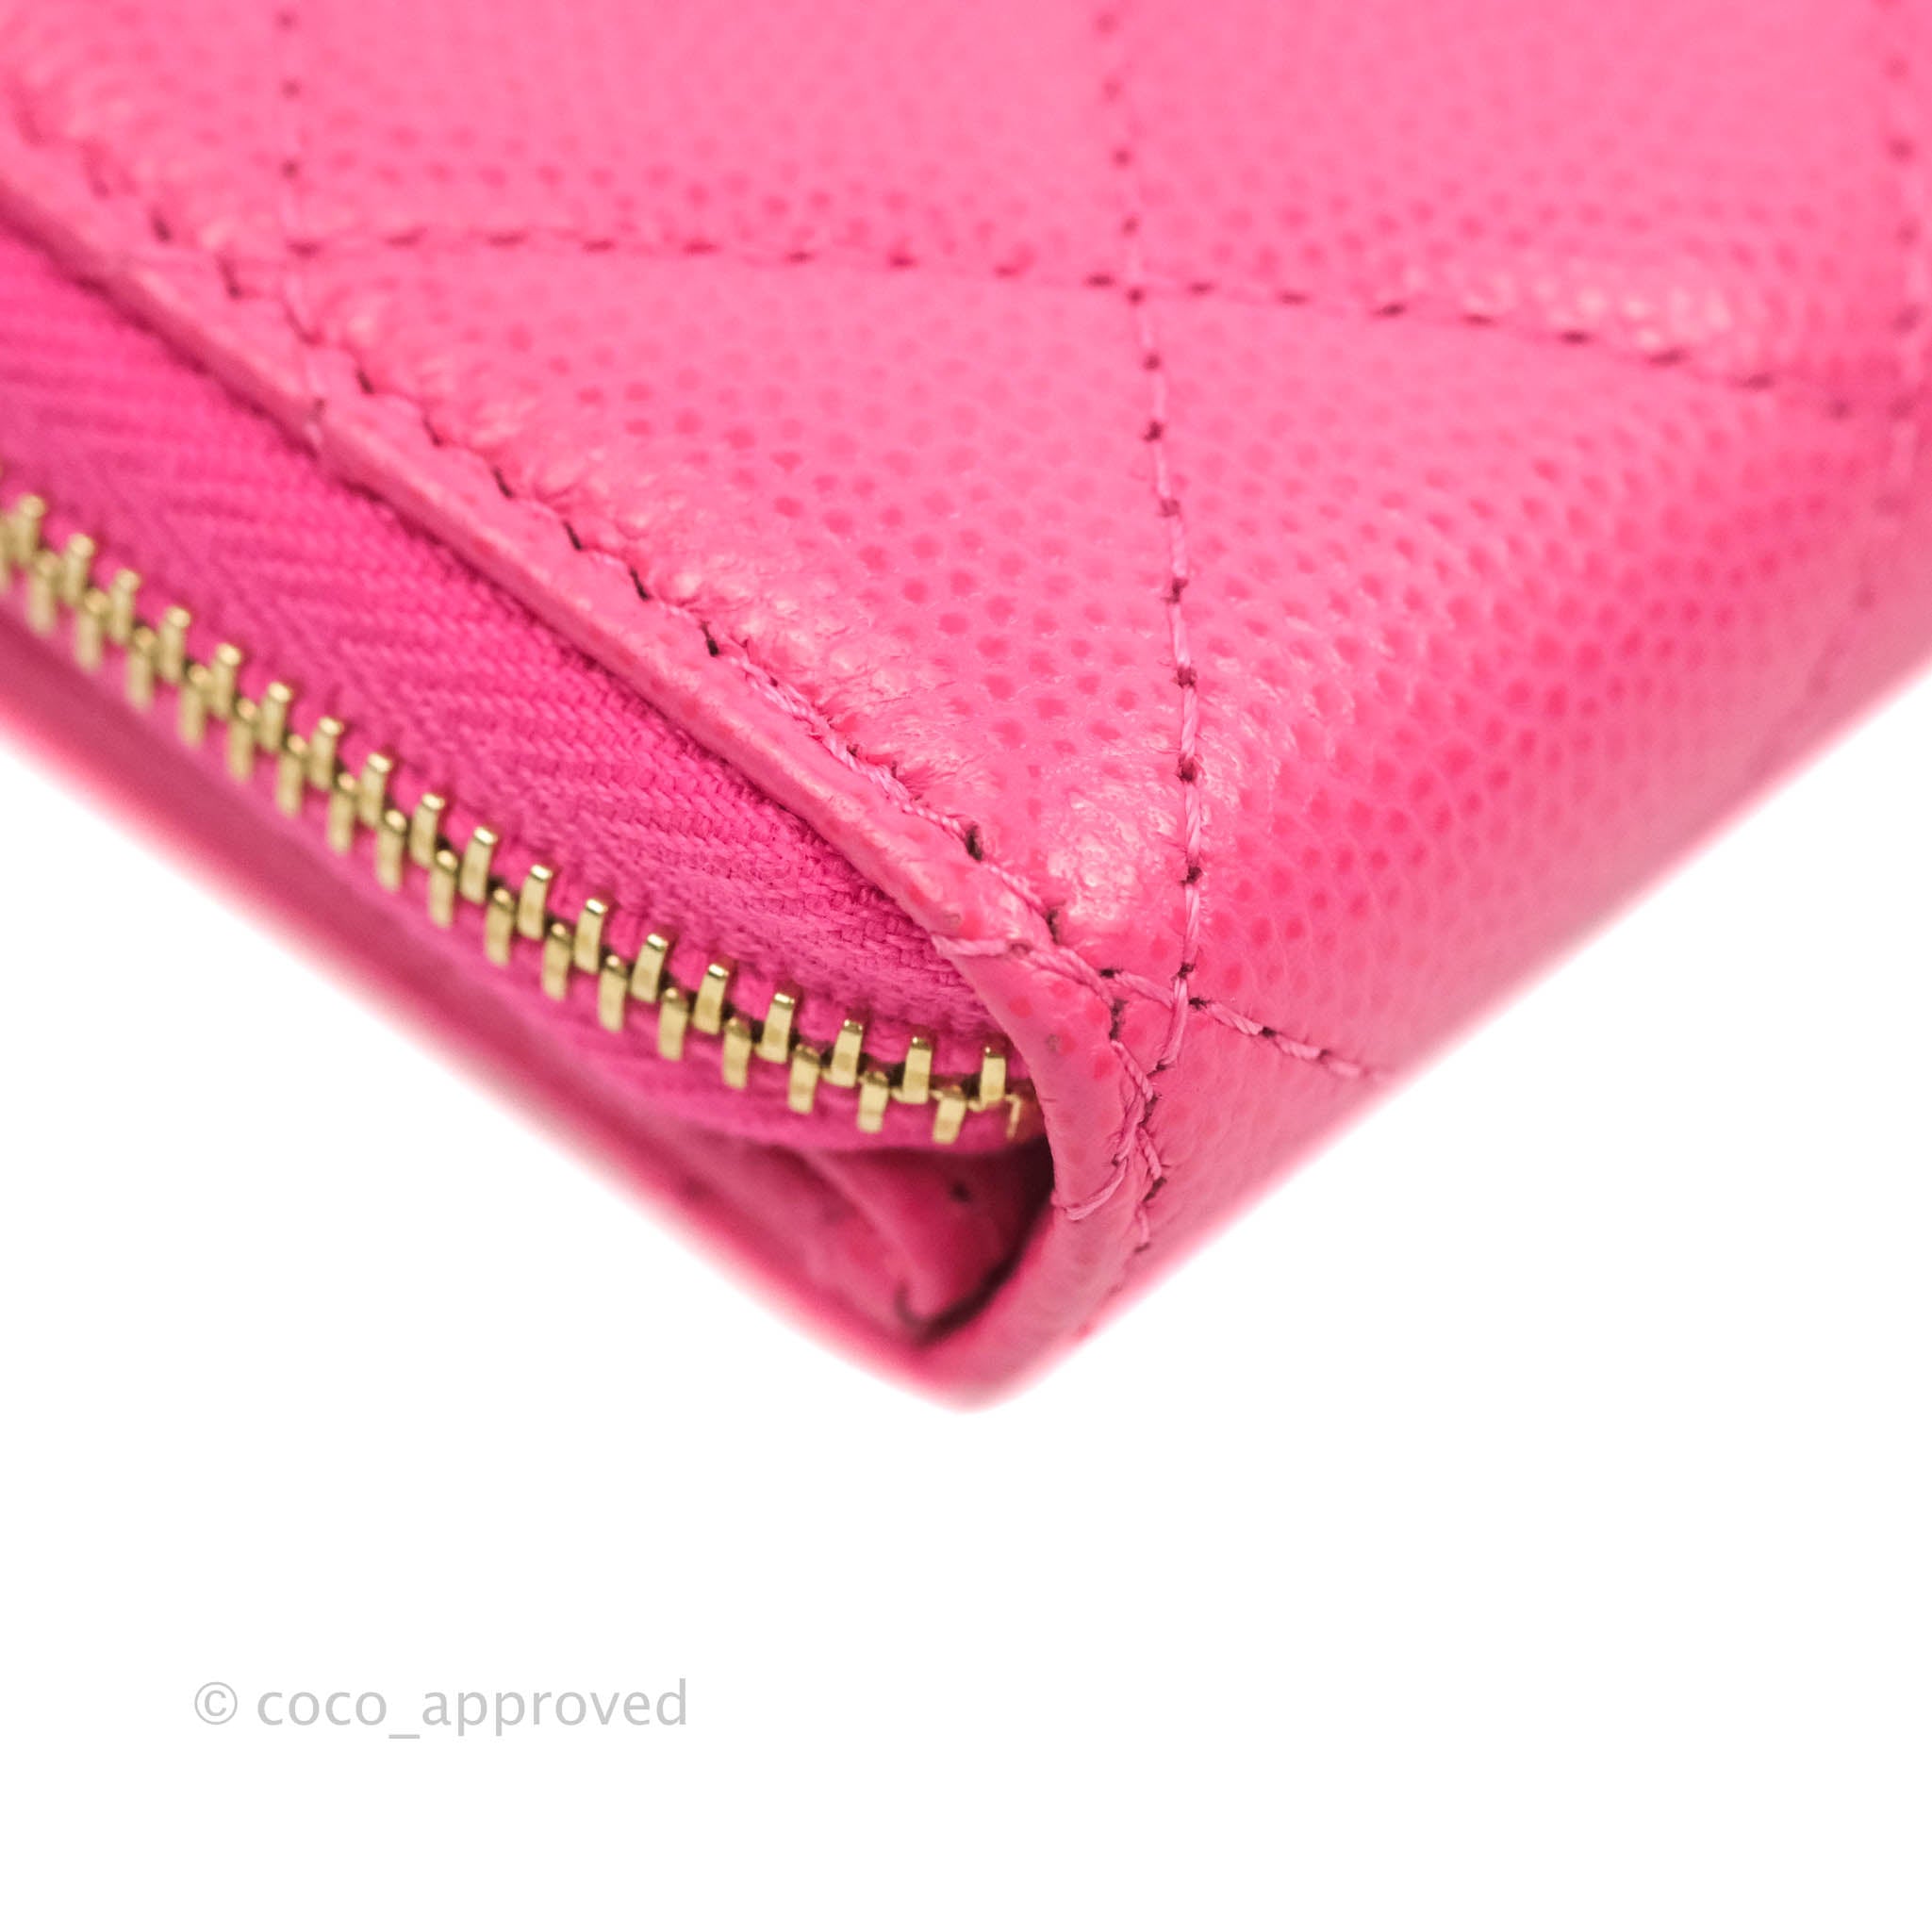 CHANEL Iridescent Caviar Quilted Zip Coin Purse Pink 866244